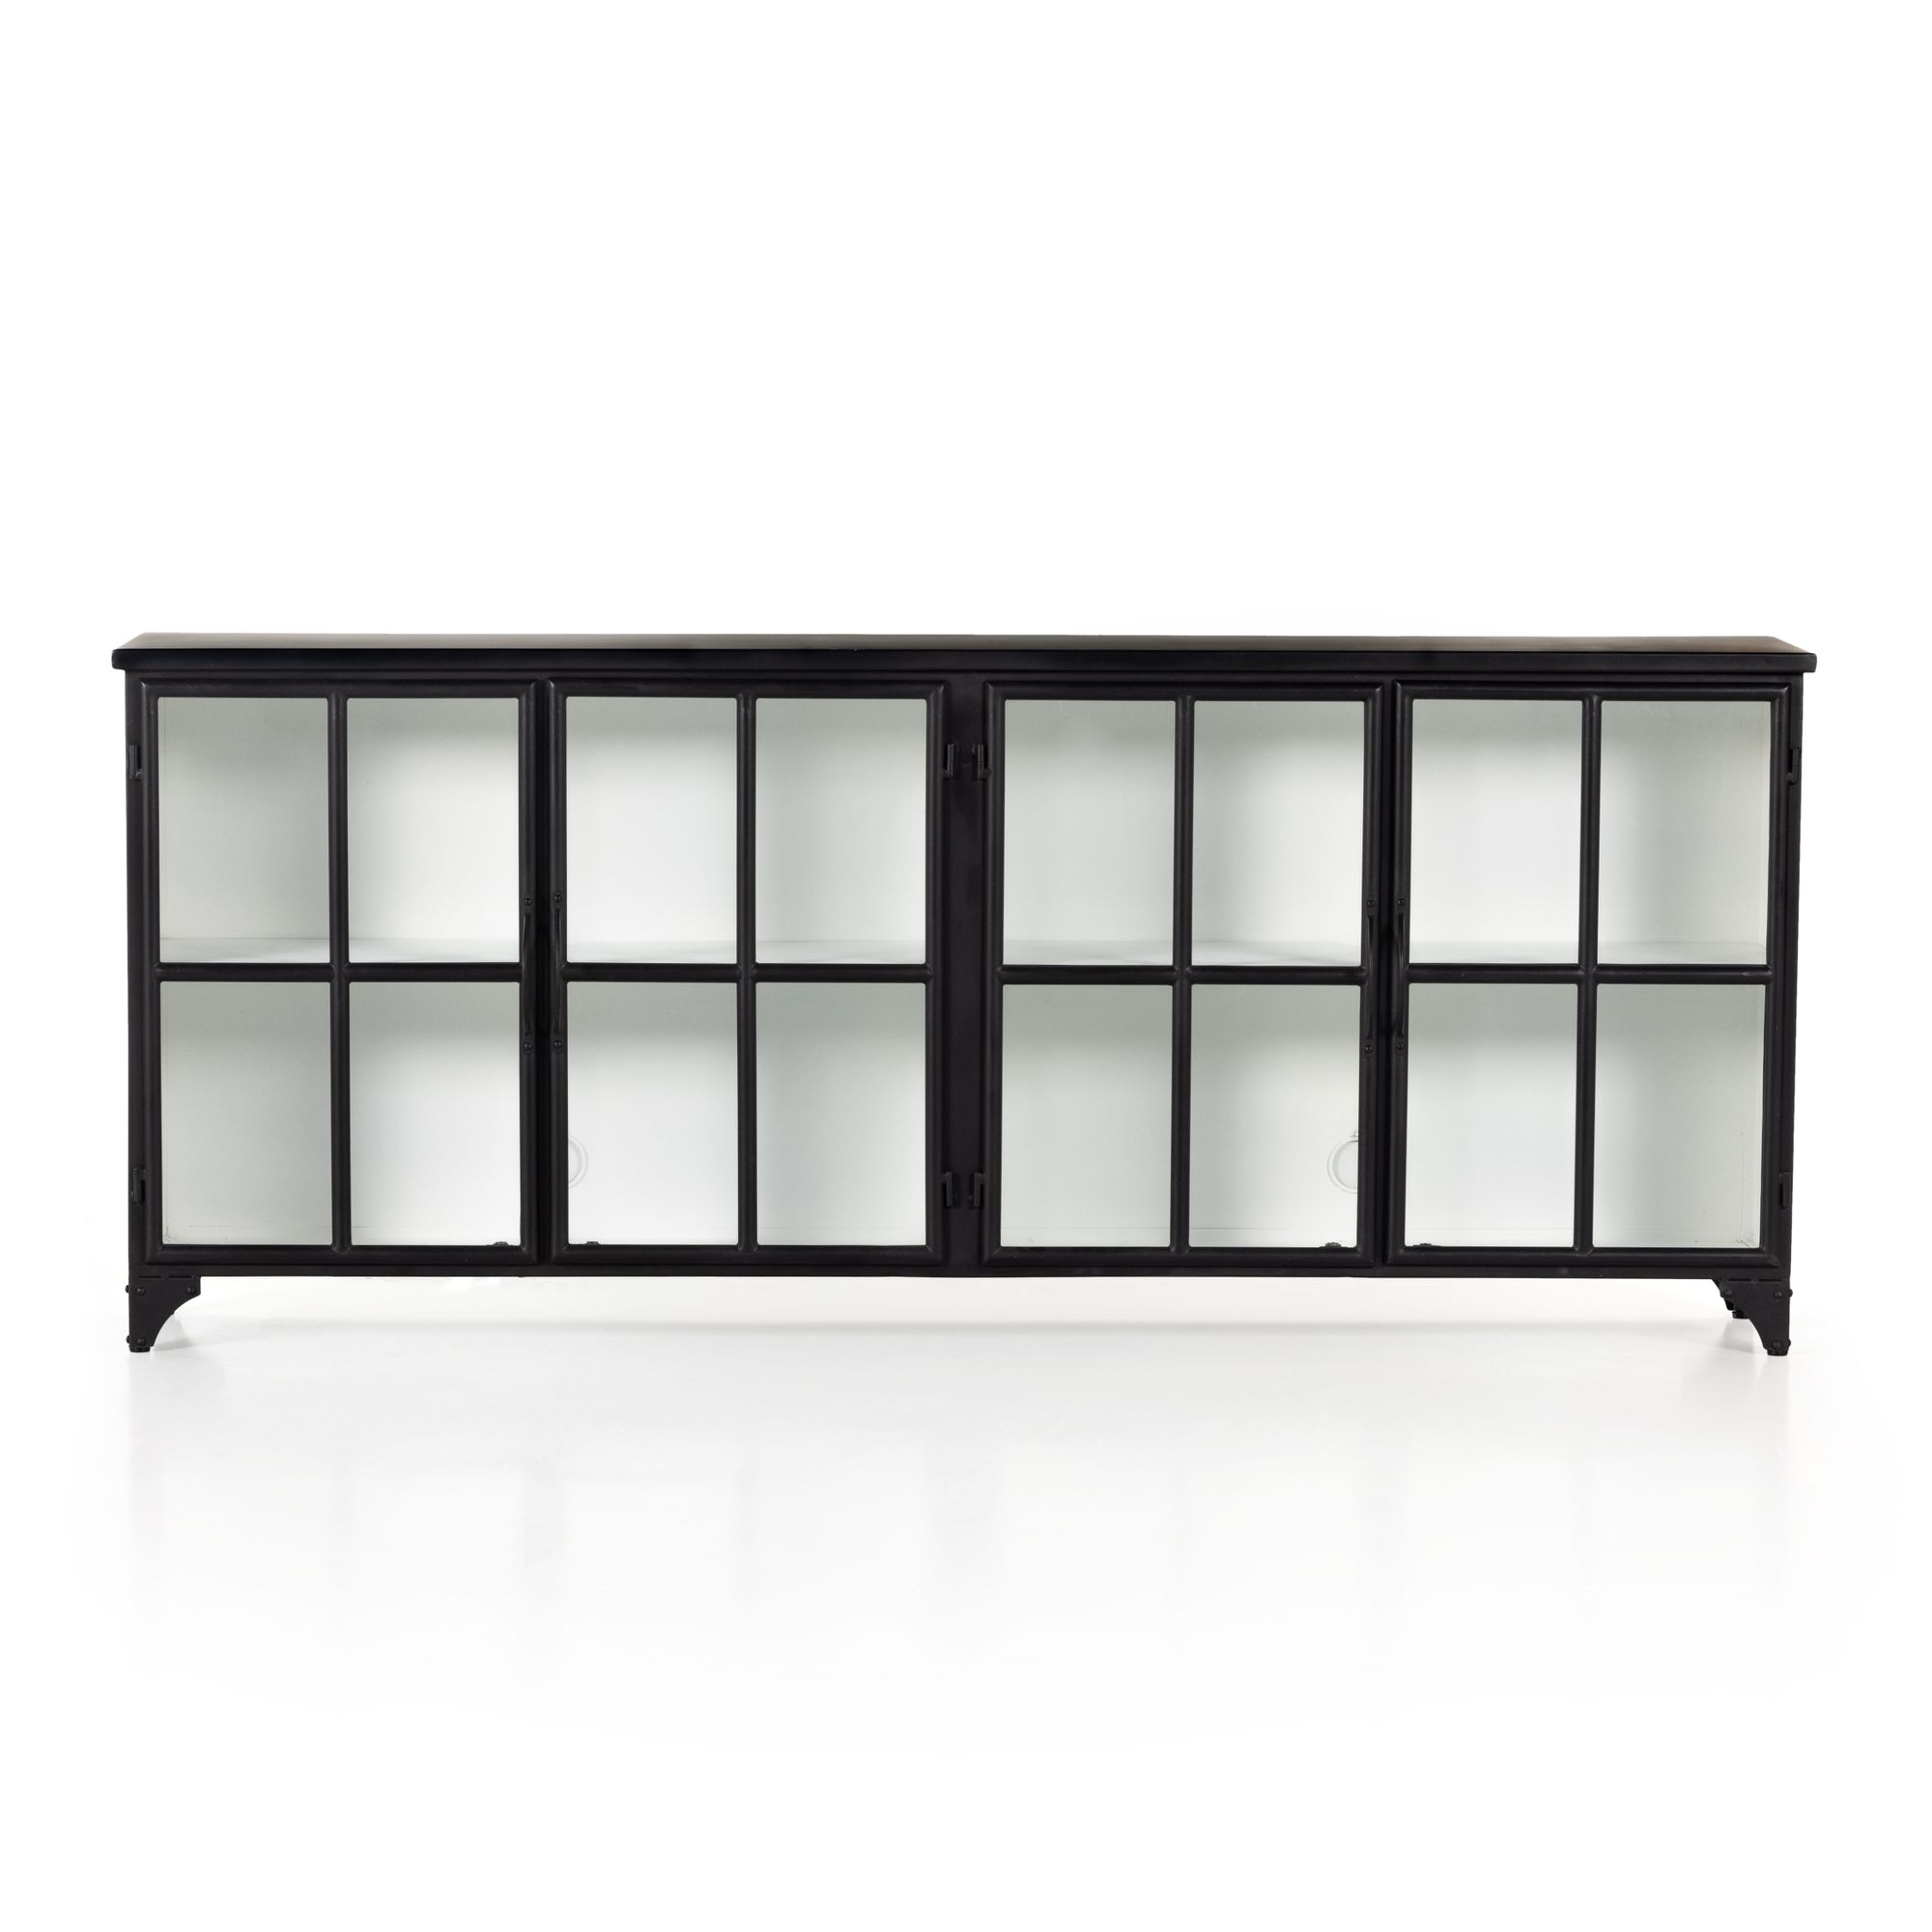 60 Crystal Cove Glass Cabinet Black - Threshold™ Designed With